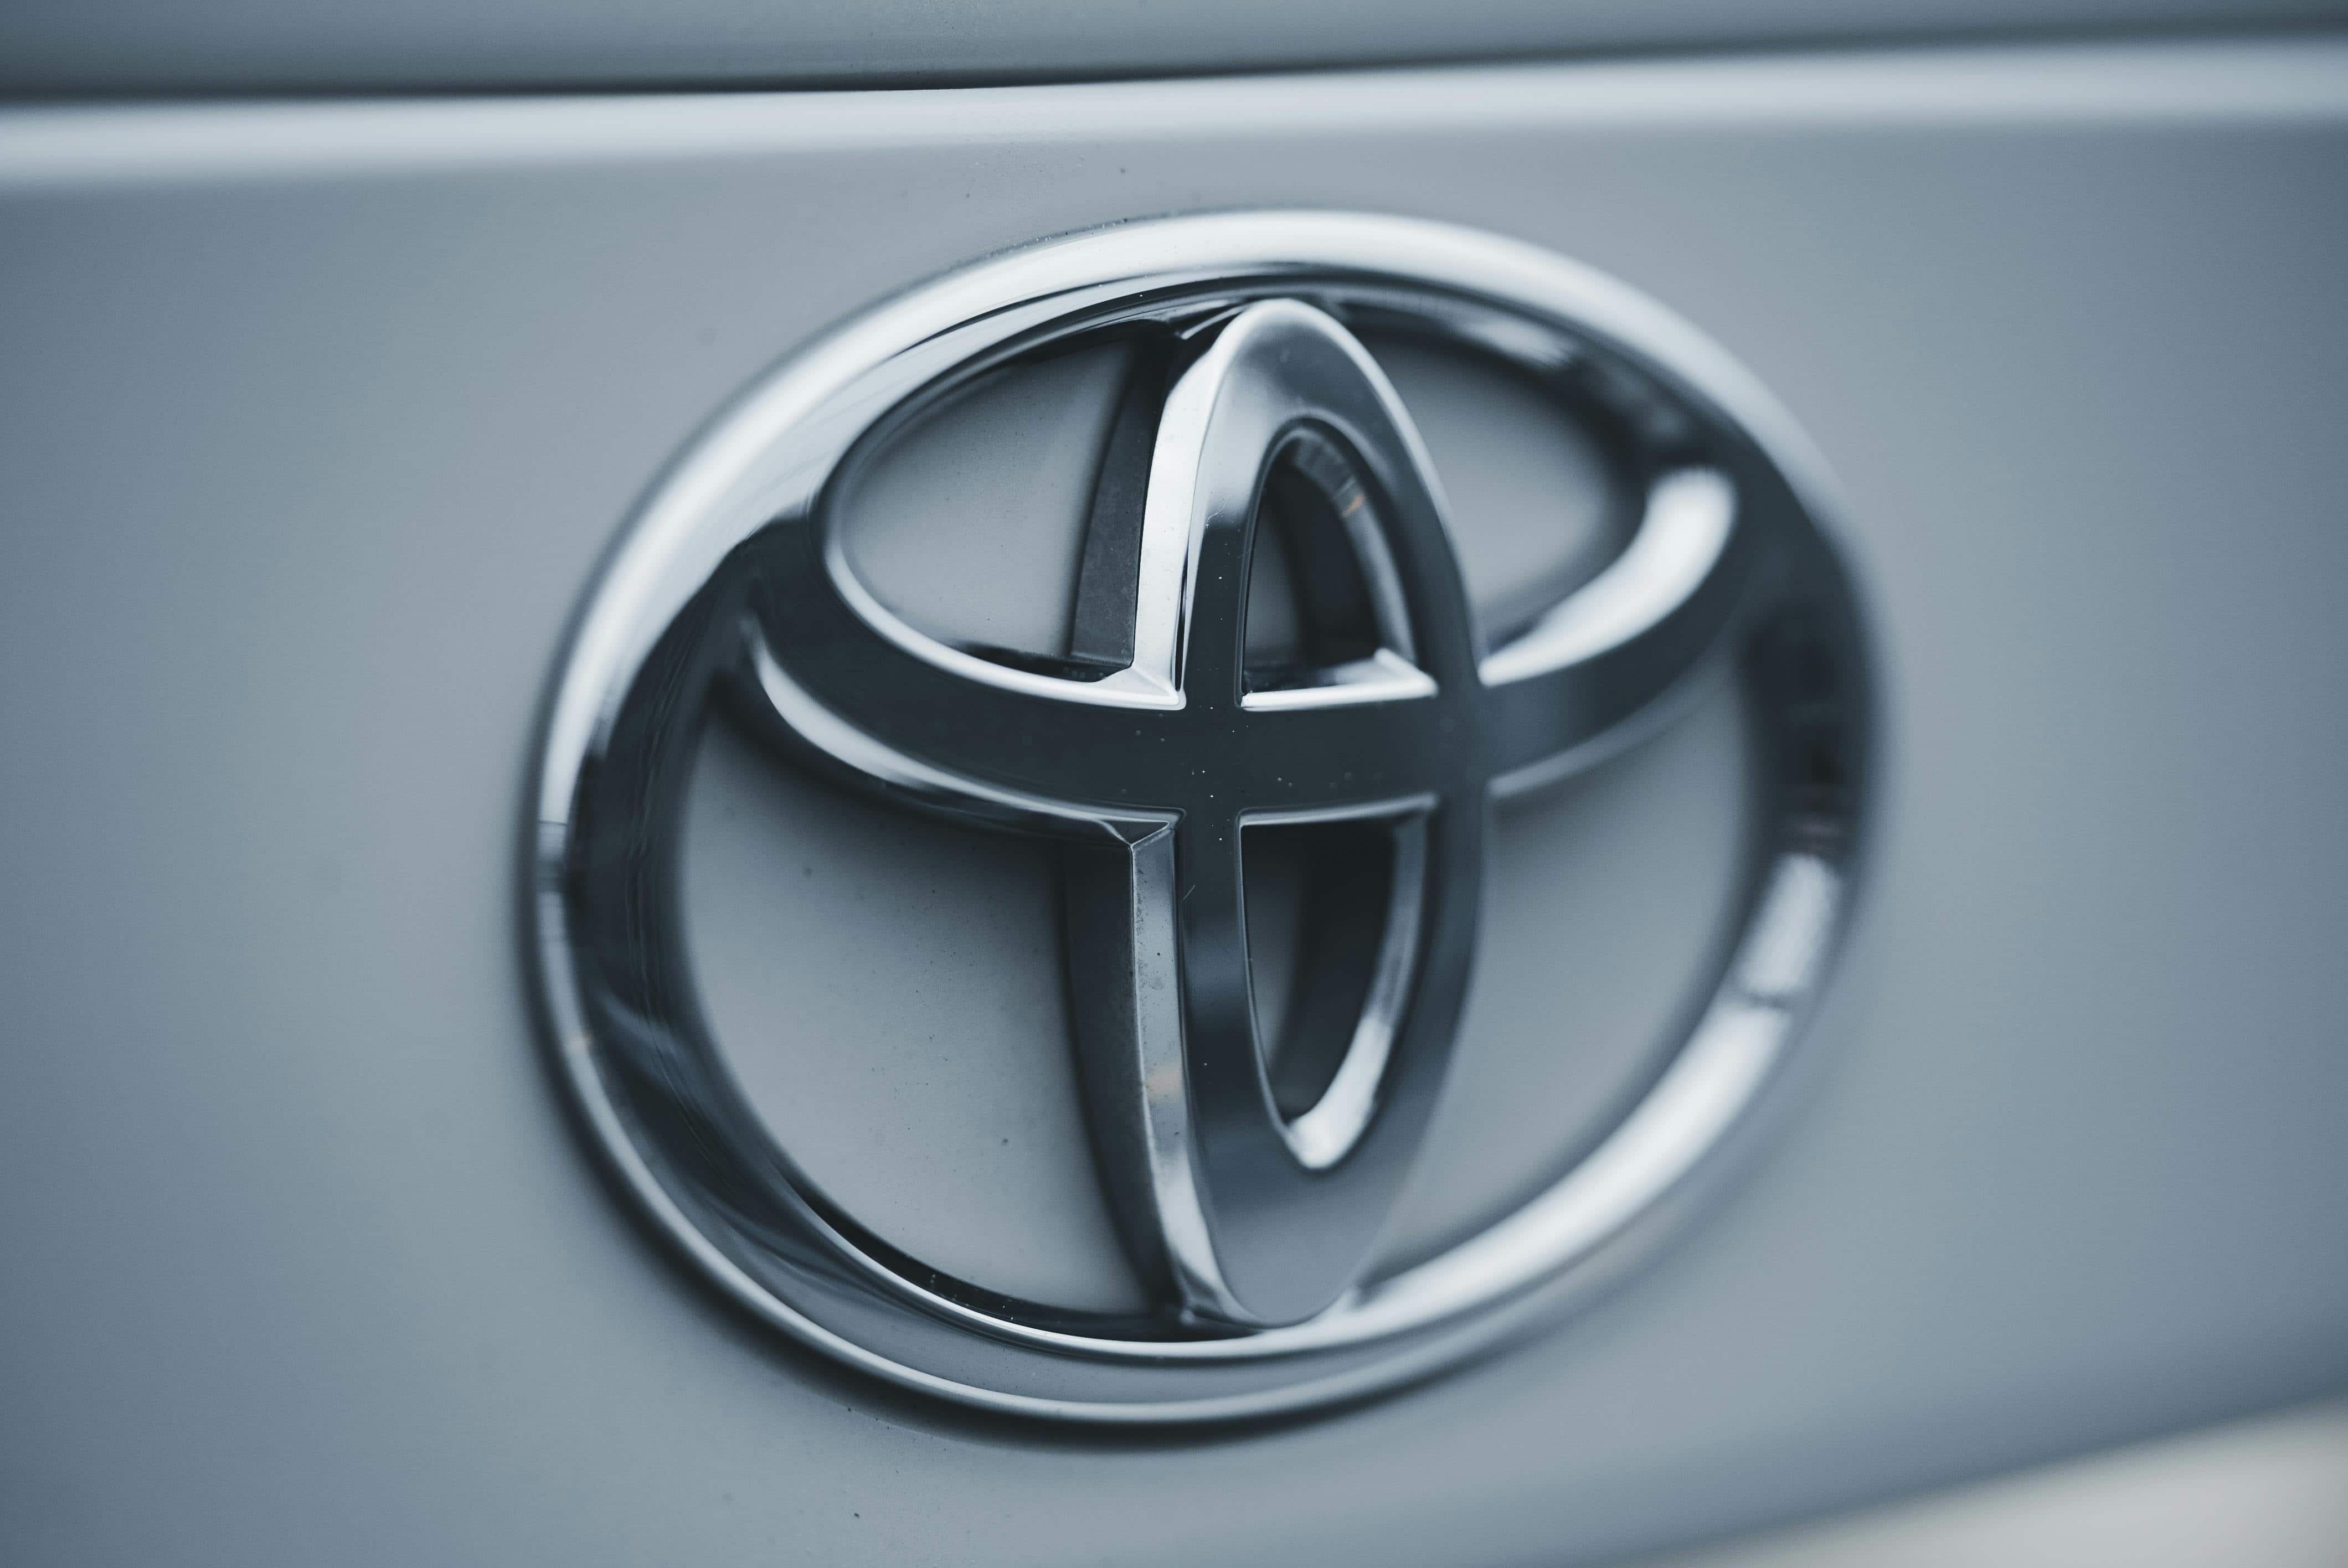 Toyota achieves highest-ever monthly sales in June with 27,474 units